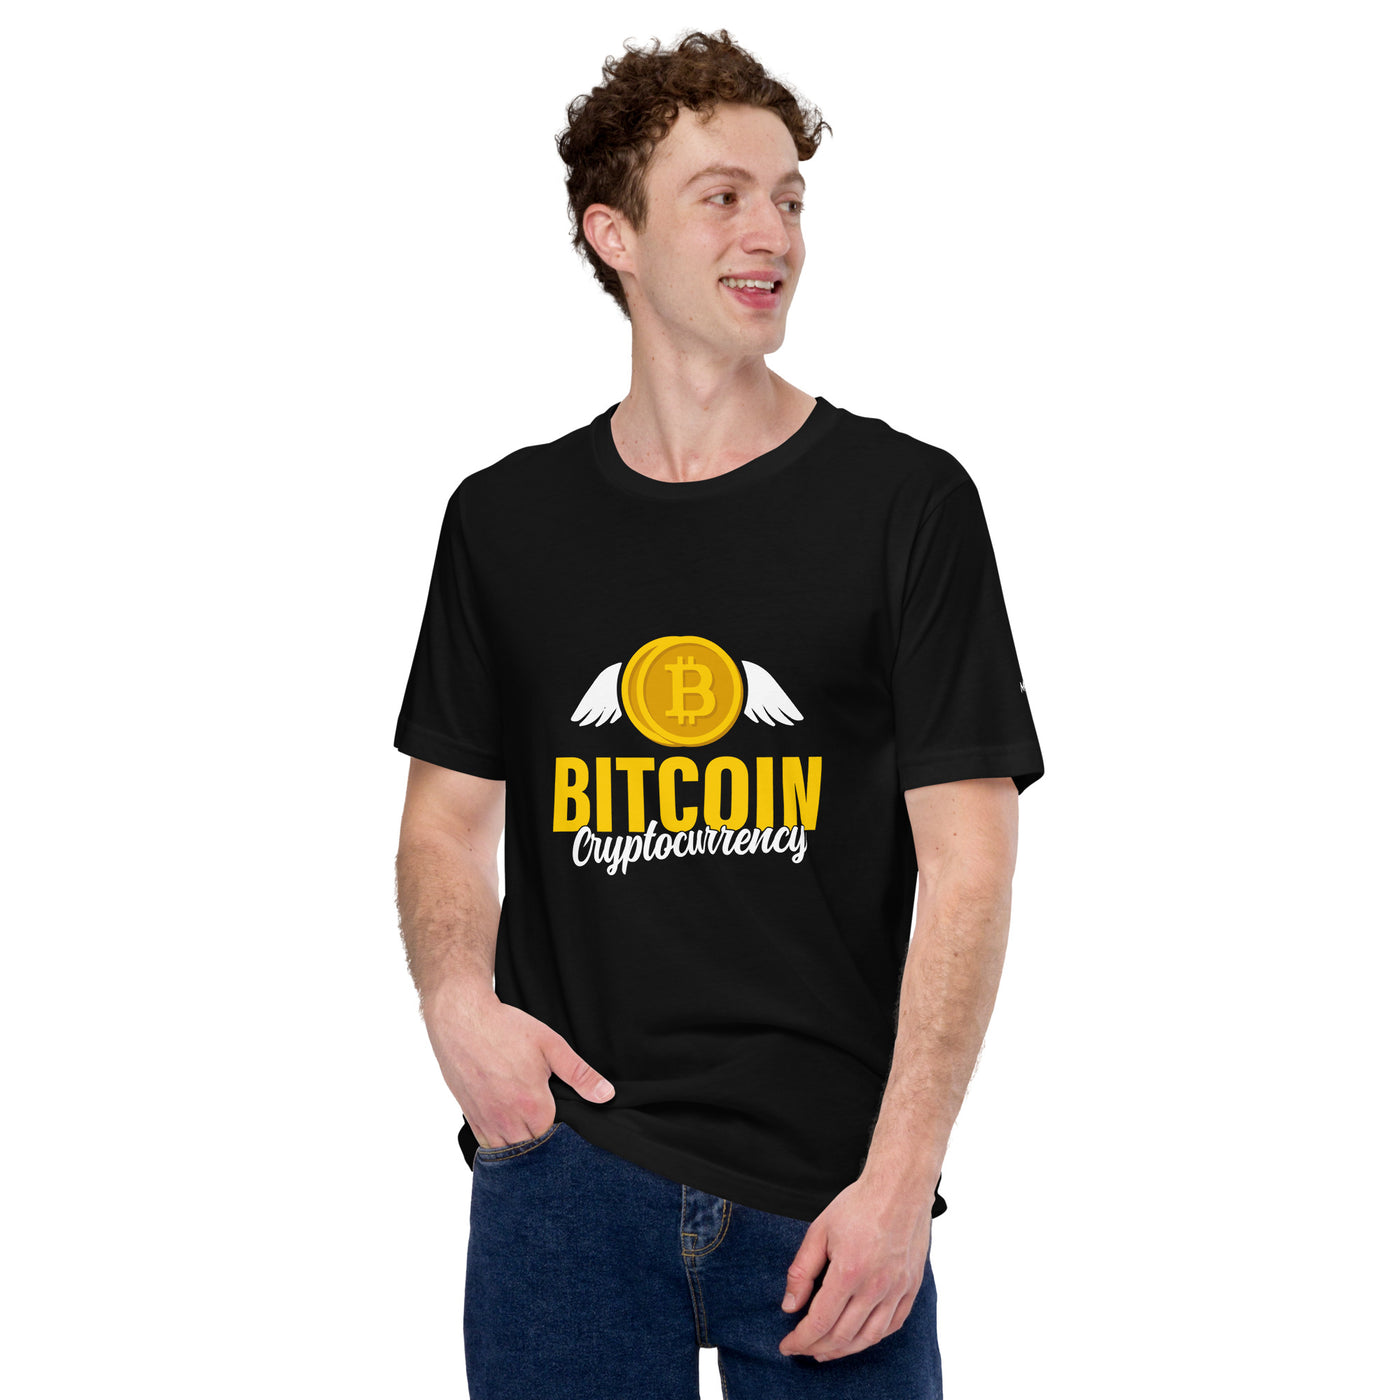 Bitcoin Cryptocurrency - Unisex t-shirt